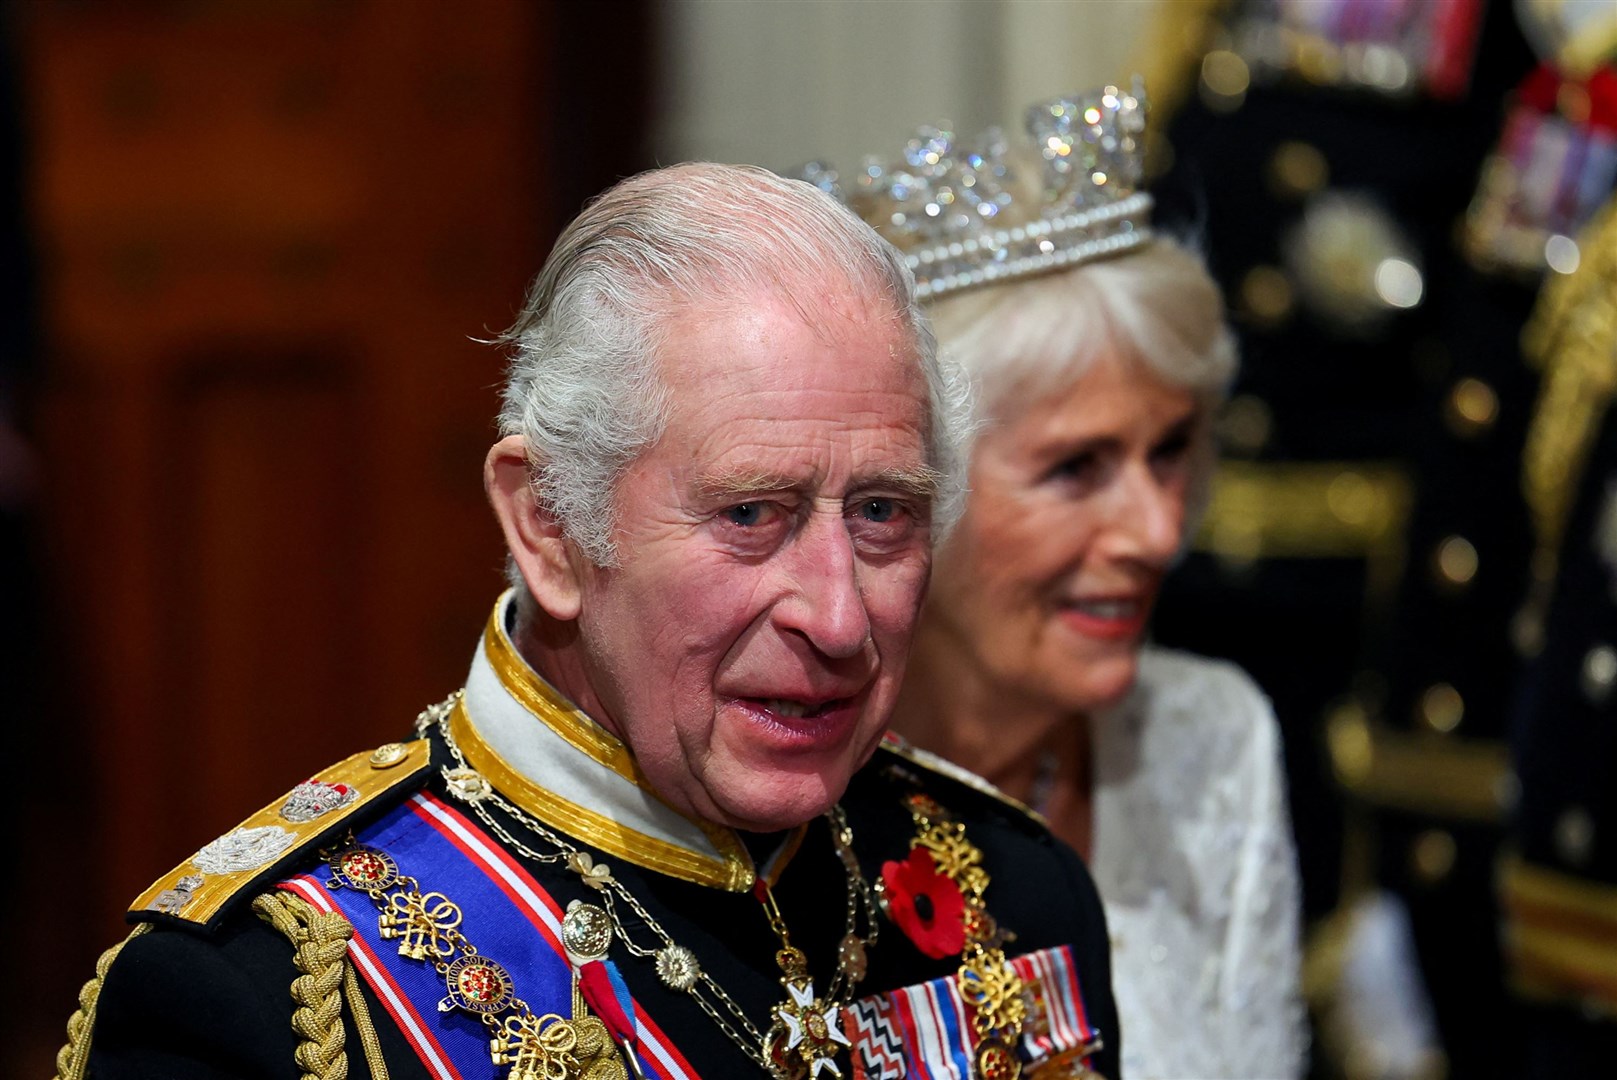 The King and Queen at Charles’s first state opening of Parliament as monarch this week (Hannah McKay/PA)